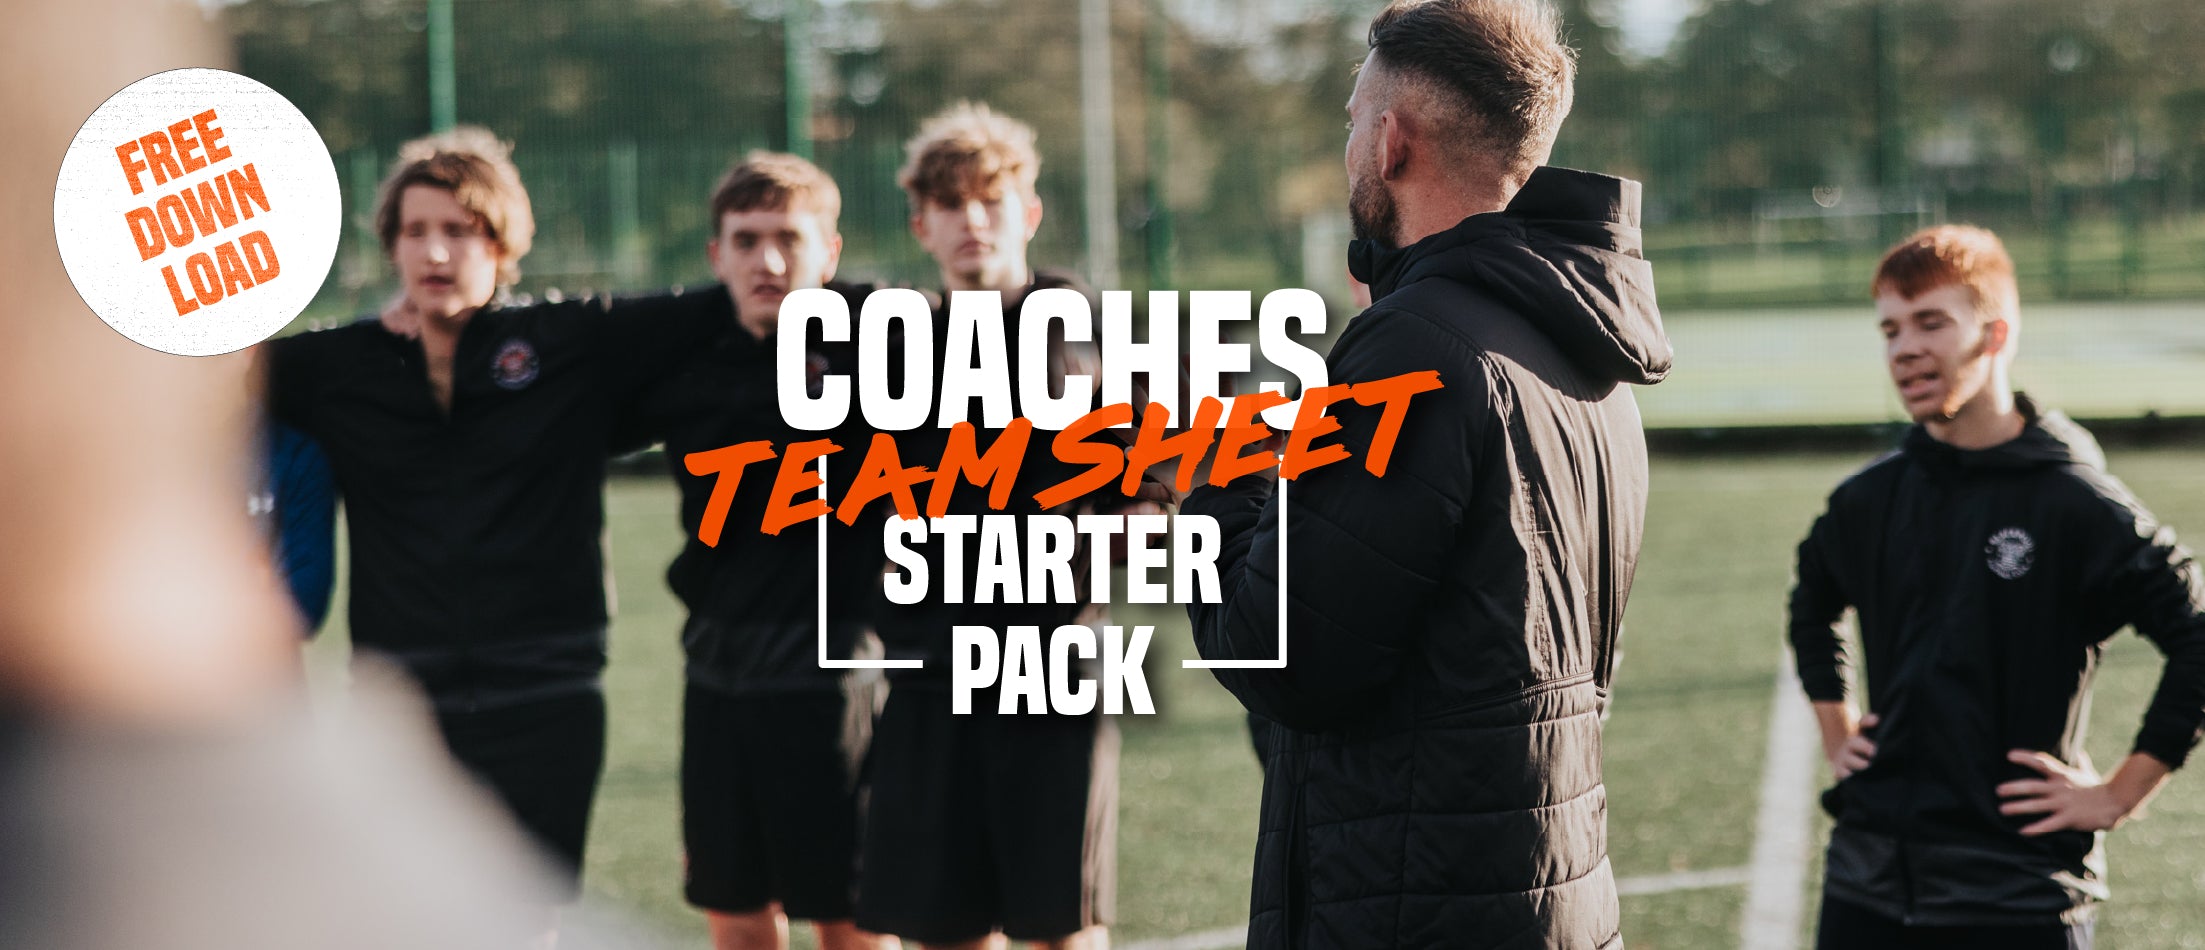 FREE TEAM SHEET AND SOCCER PITCH DOWNLOAD WITH TEMPLATES FOR SOCCER COACHES AND TEACHERS